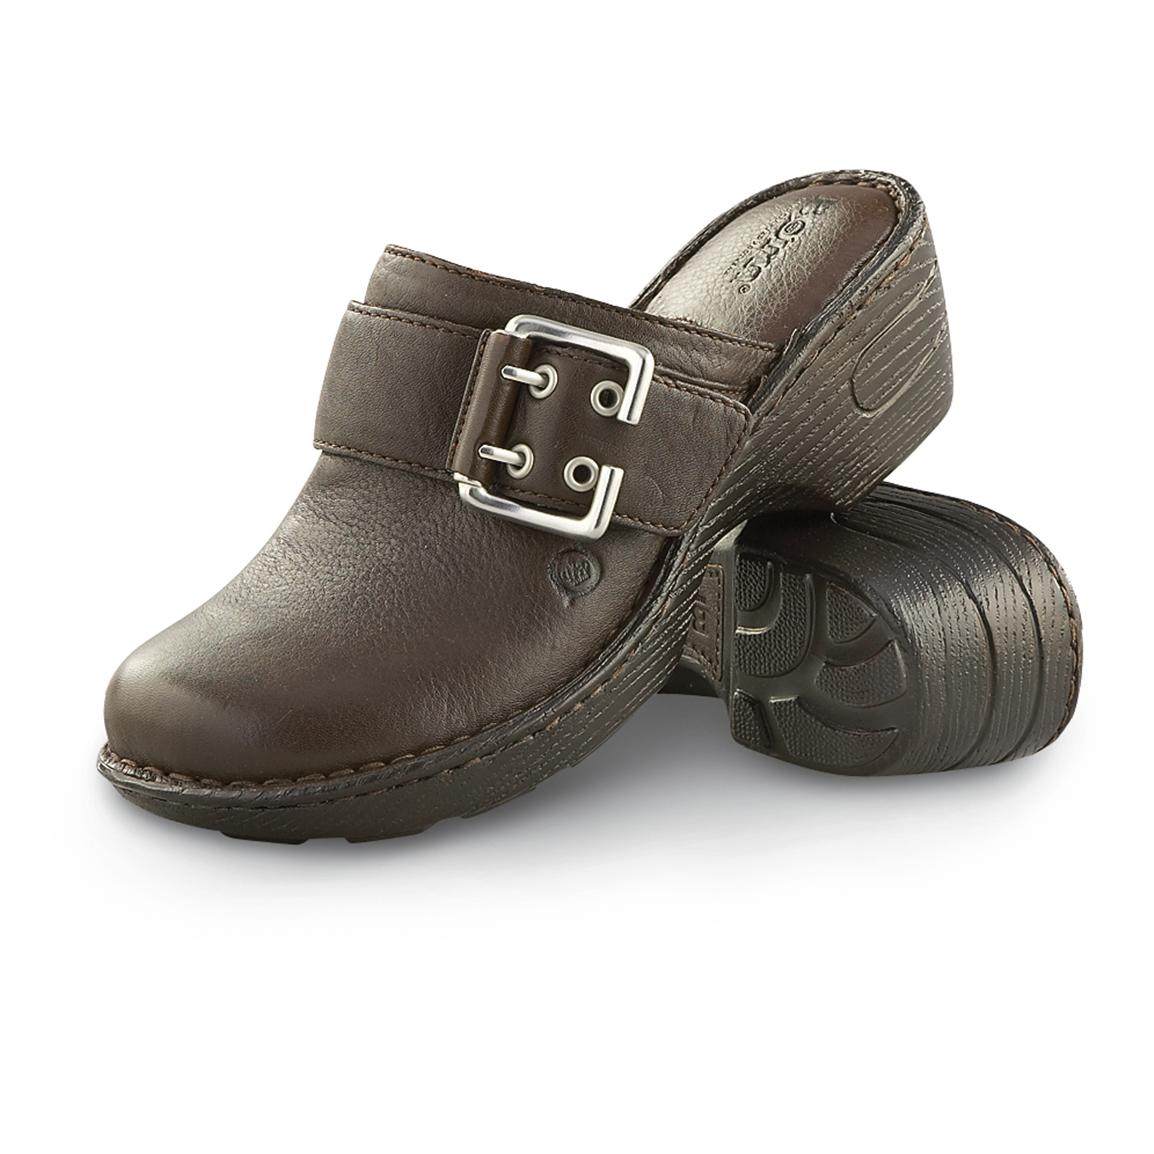 39 Casual Brown clog shoes for Girls